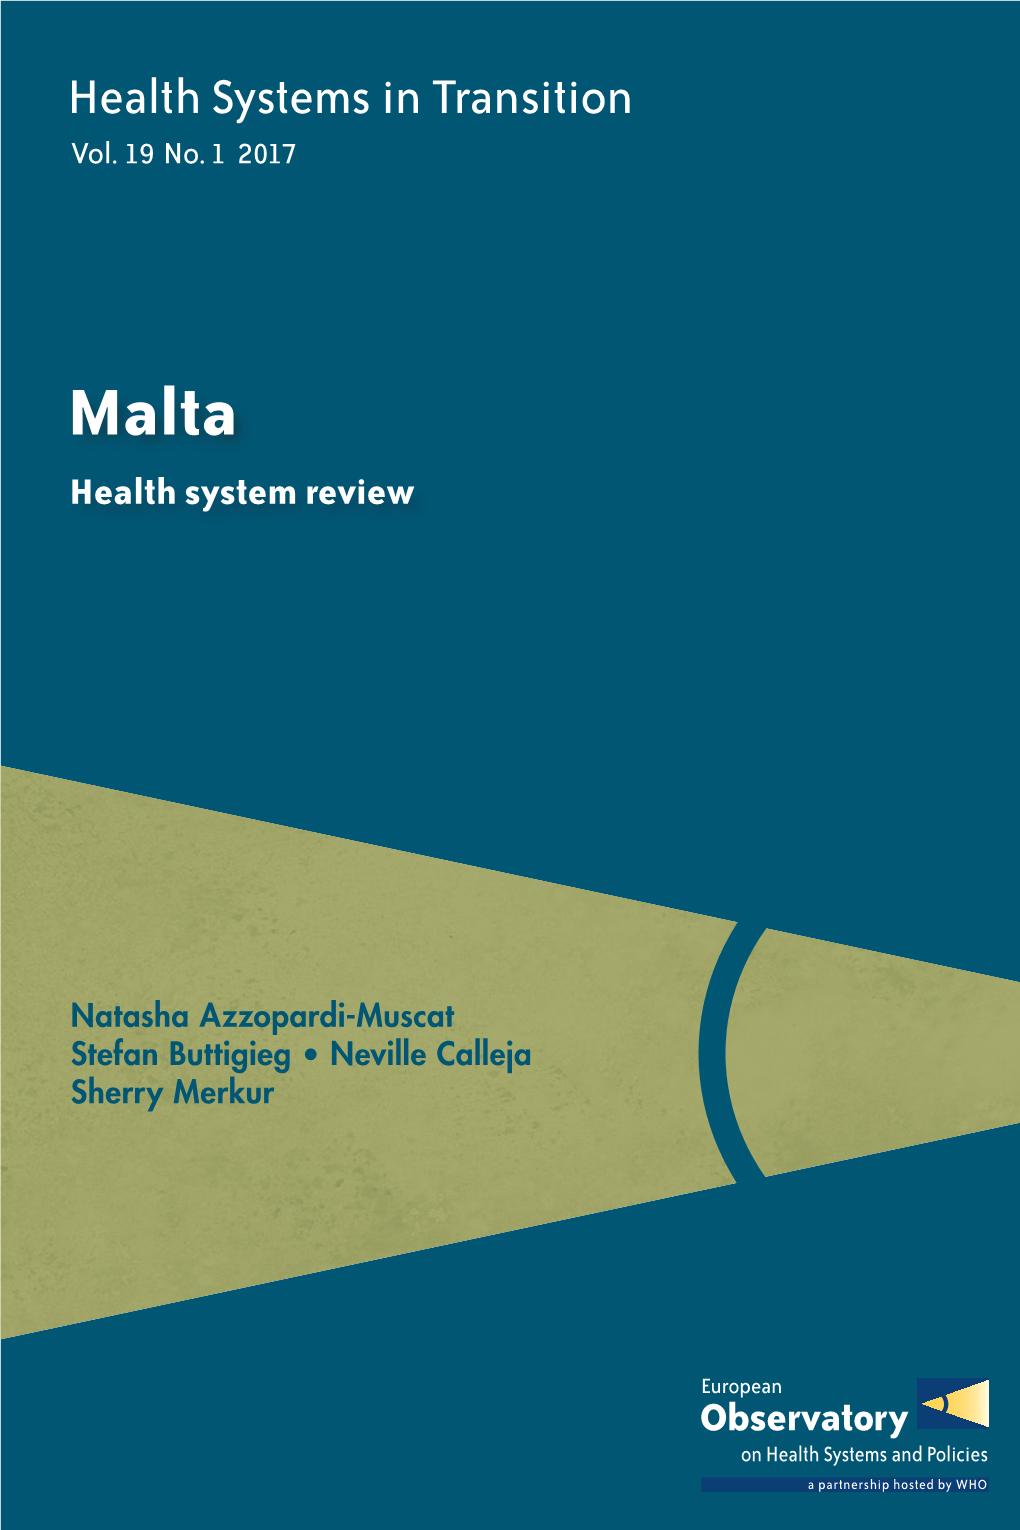 Malta Health System Review